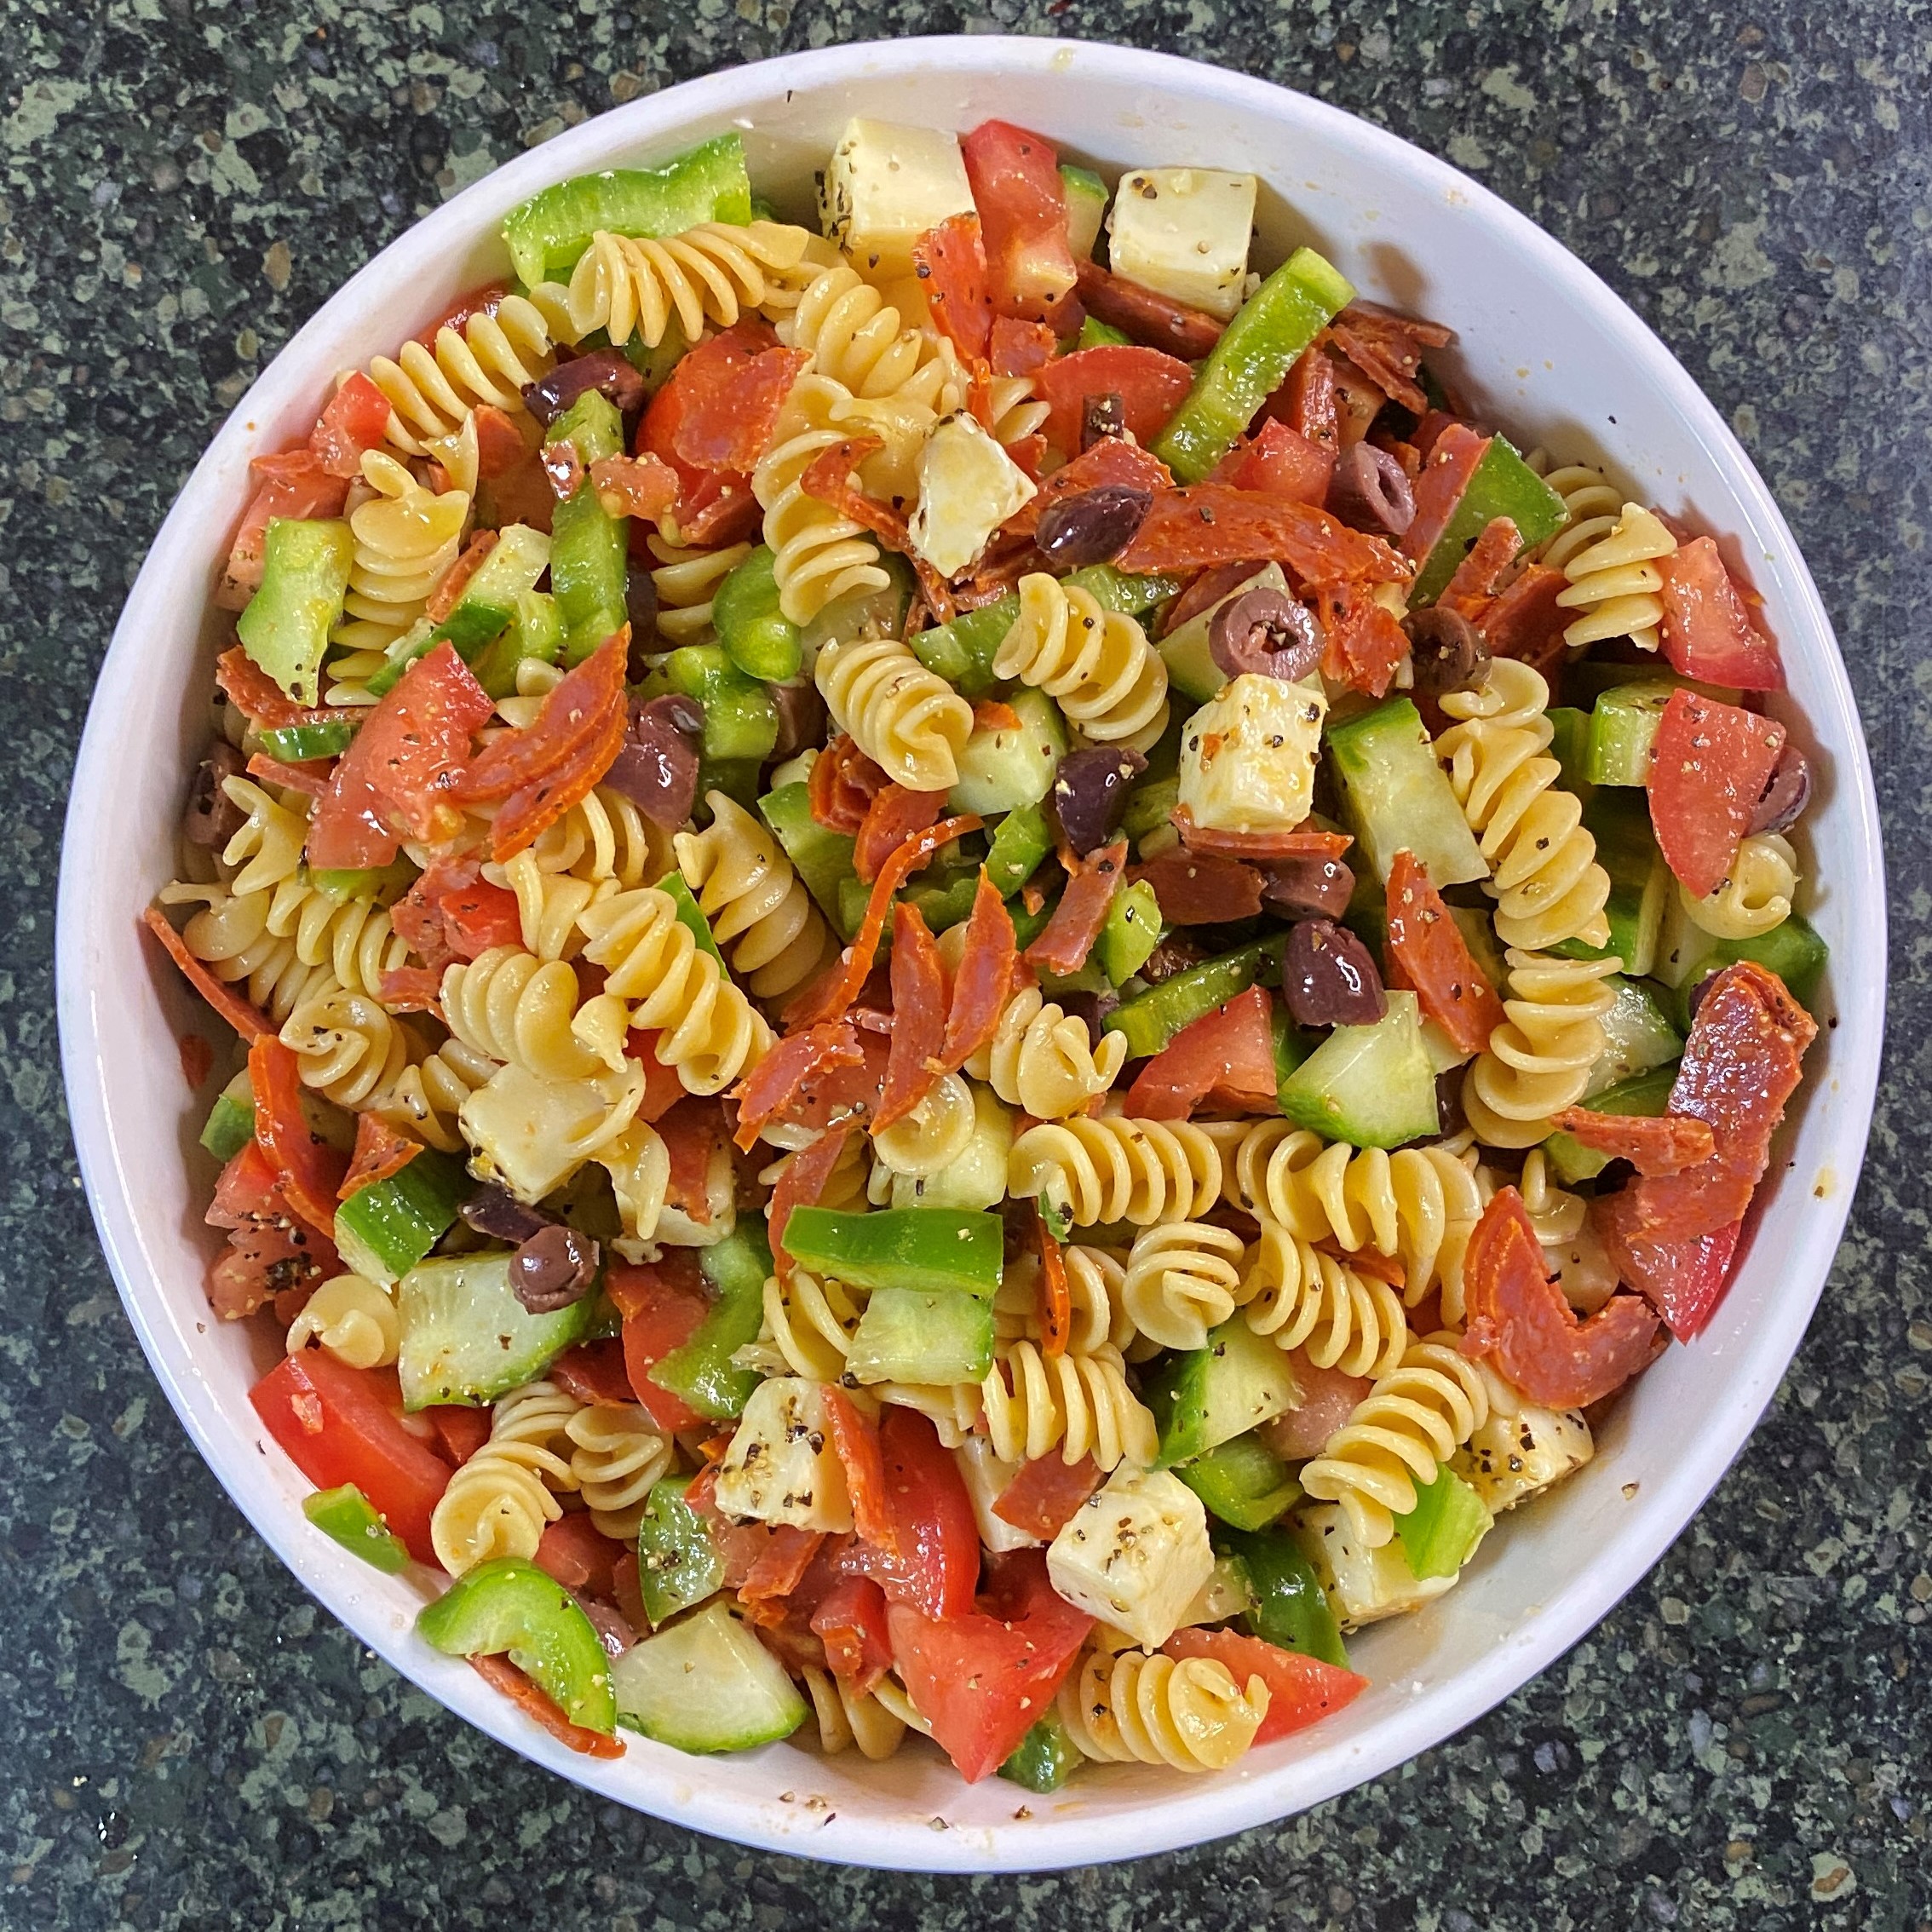 How to make the Best Cold Pasta Salad